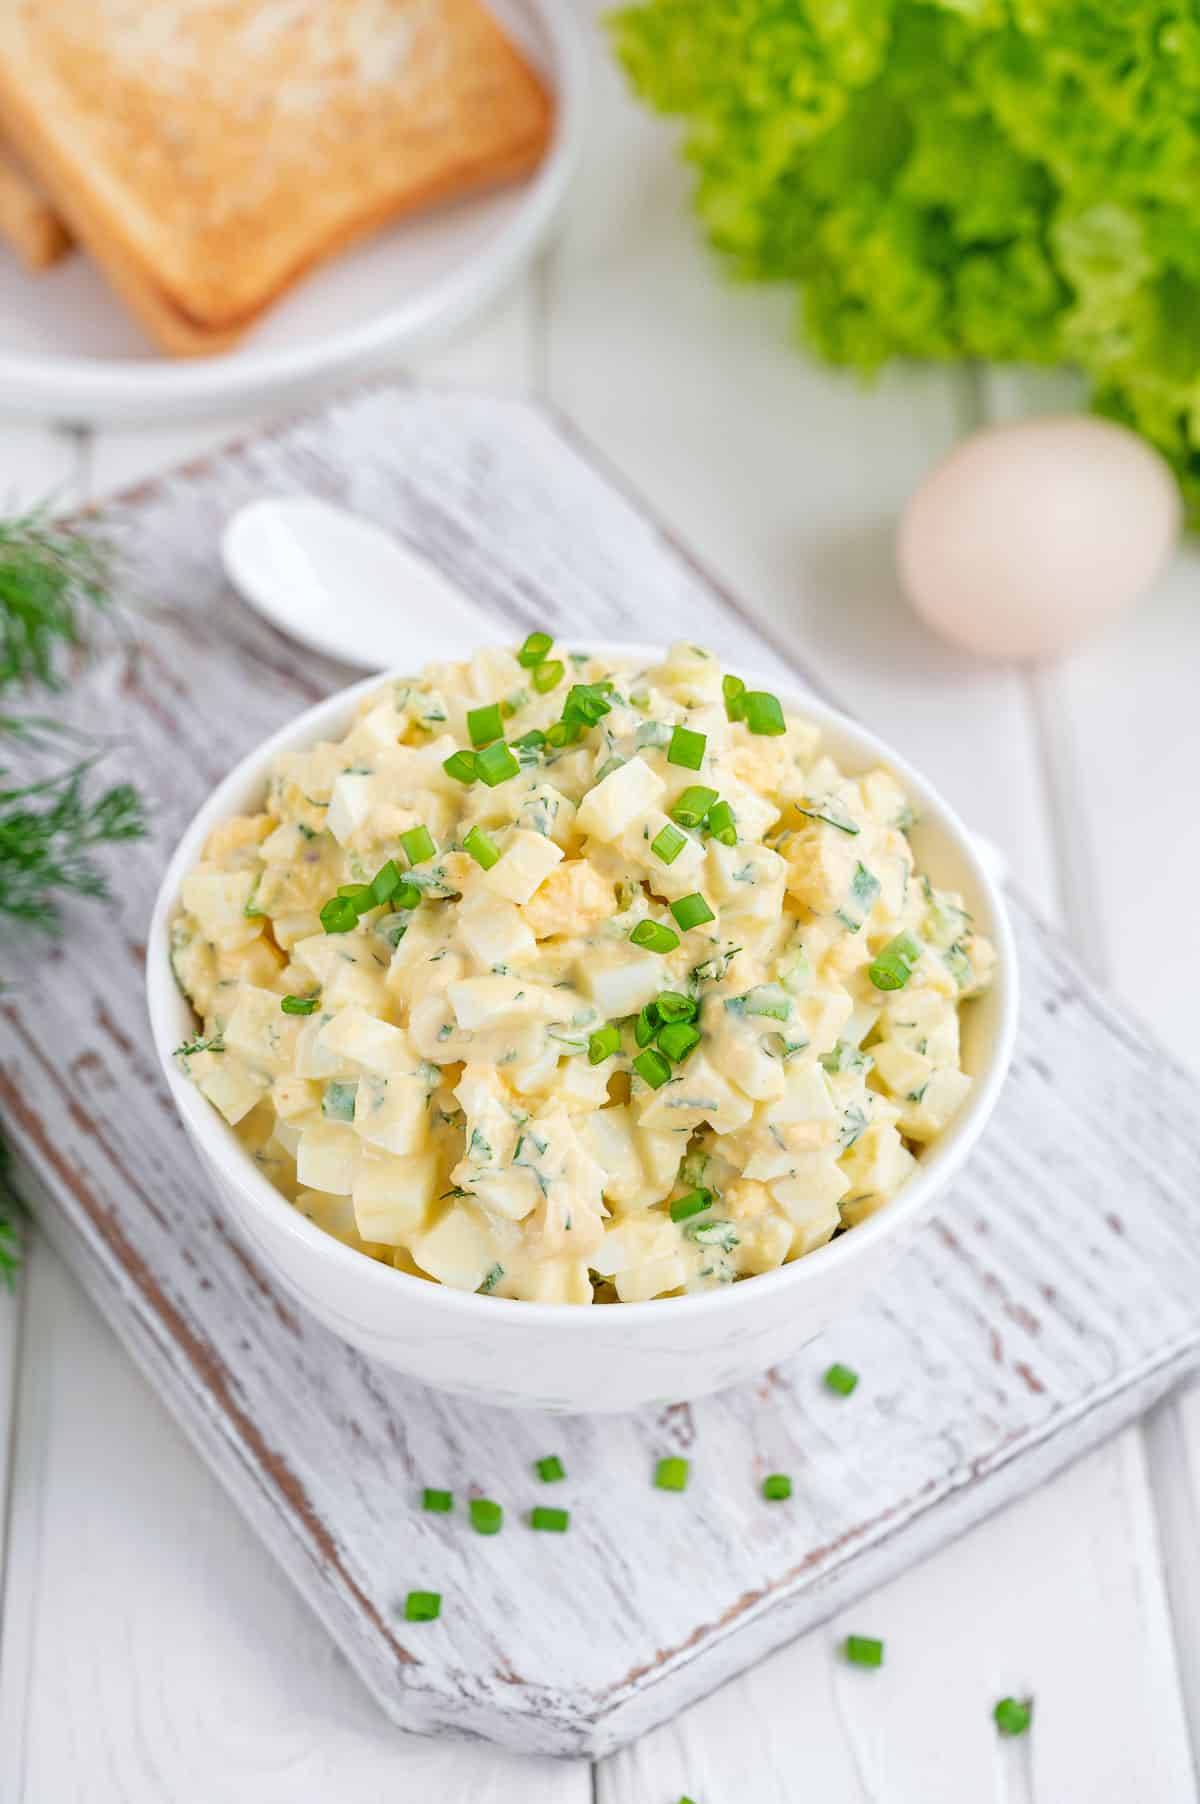 a white bowl full of egg salad, garnished with green onions, with tomato, bread and eggs in the background